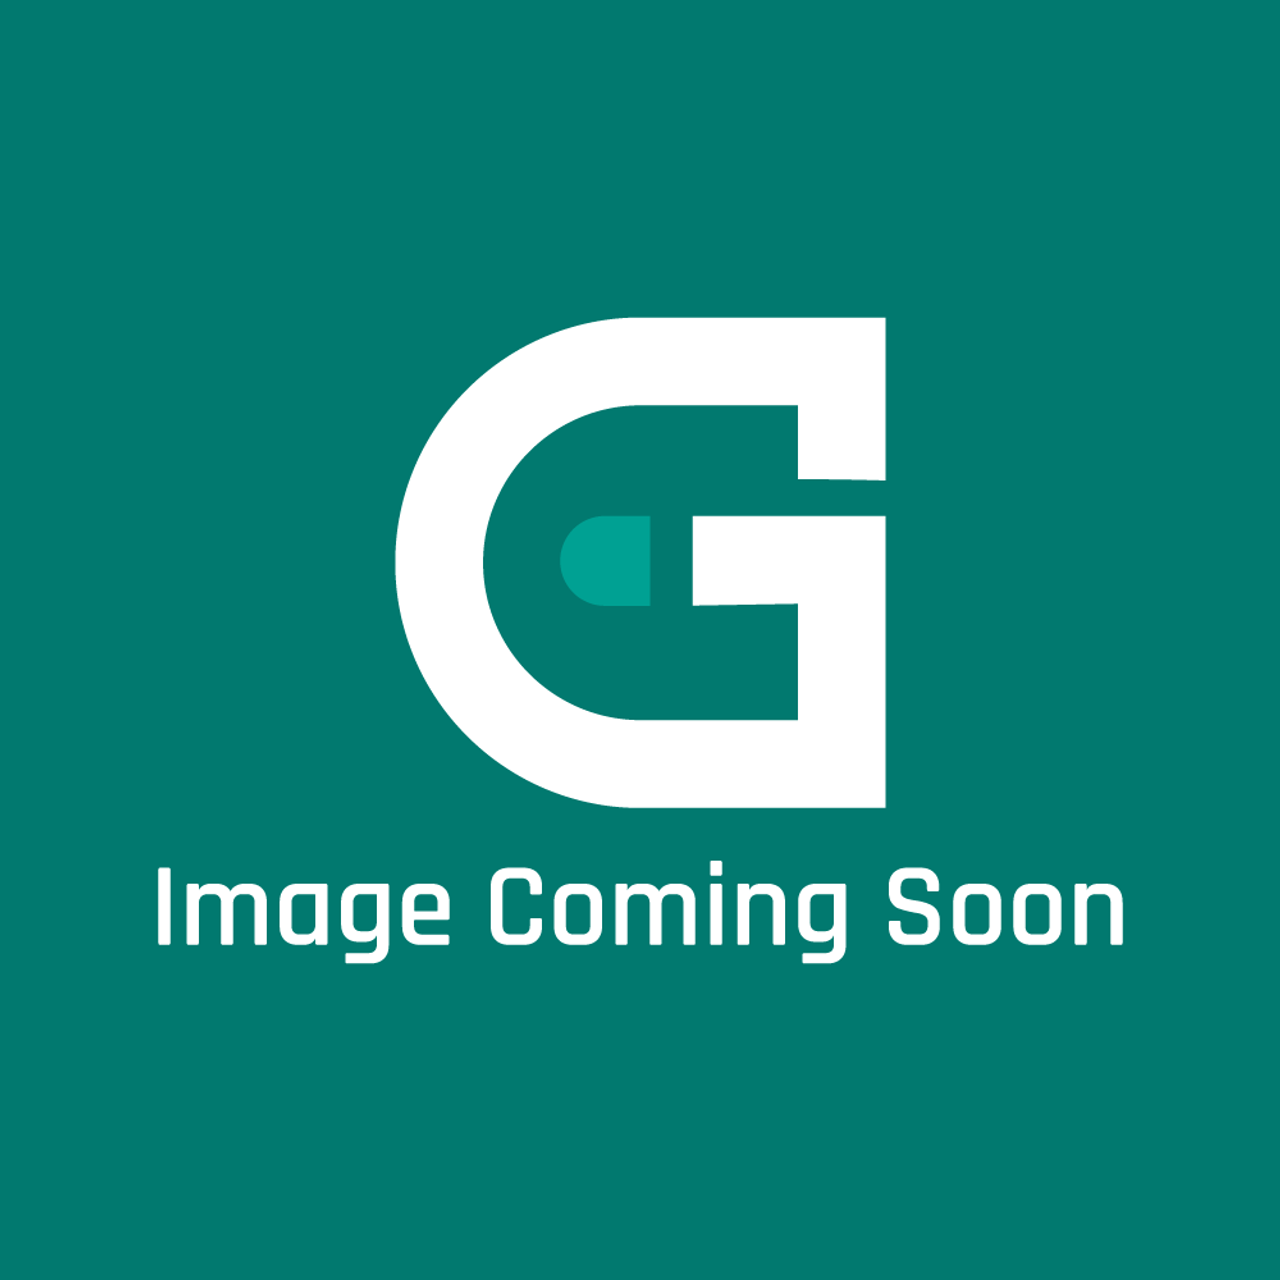 Frigidaire - Electrolux A00053601 Flapper - Image Coming Soon!